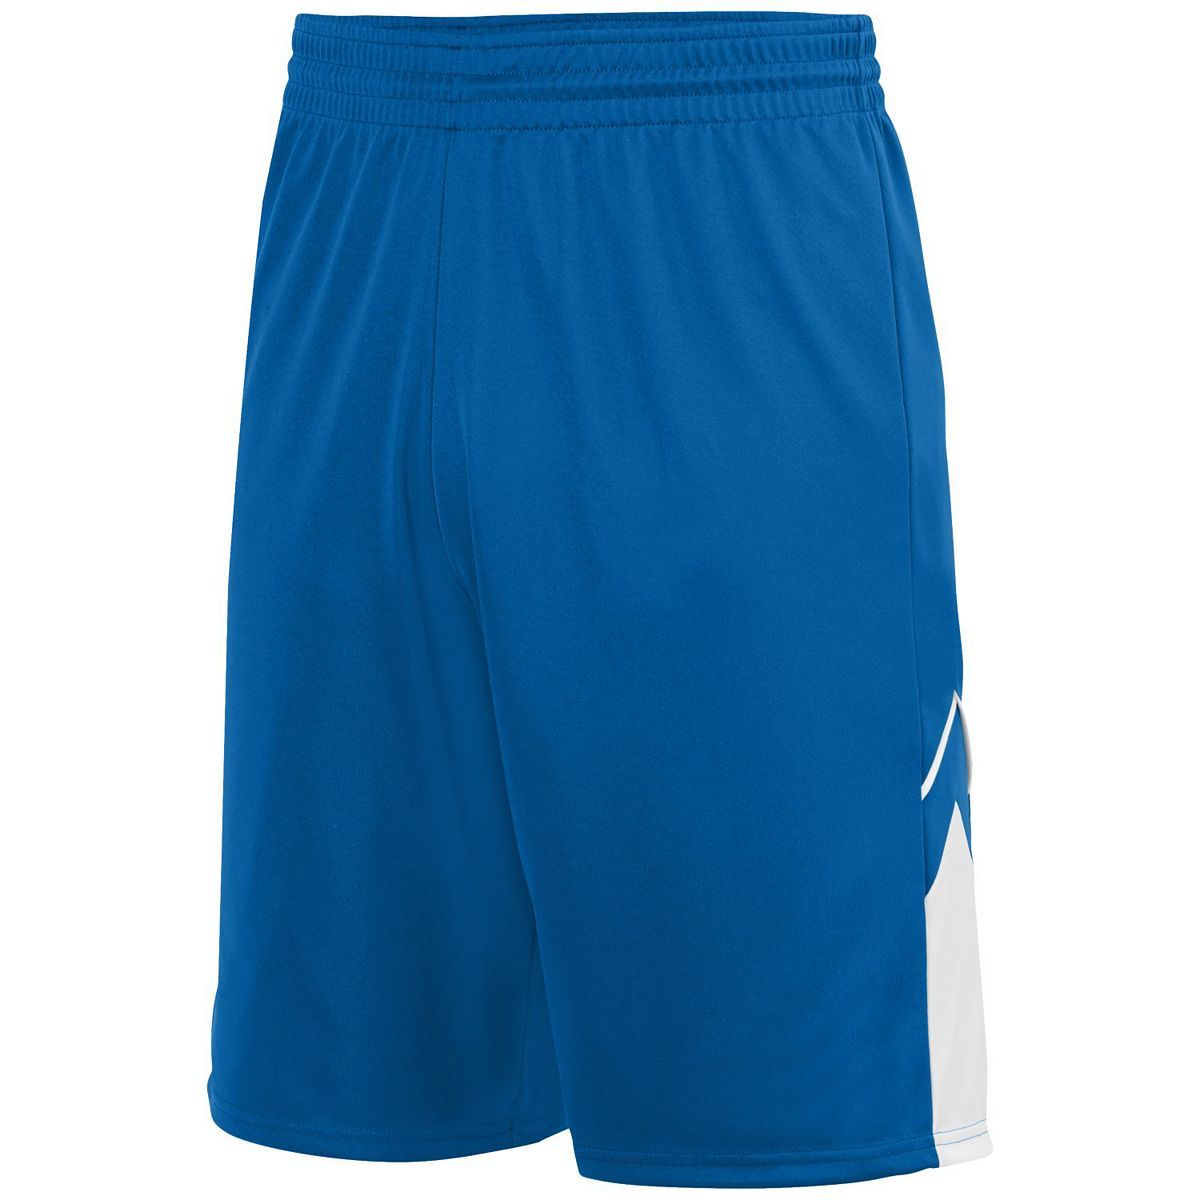 Augusta Sportswear Youth Alley-Oop Reversible Shorts in Royal/White  -Part of the Youth, Youth-Shorts, Augusta-Products, Basketball, All-Sports, All-Sports-1 product lines at KanaleyCreations.com